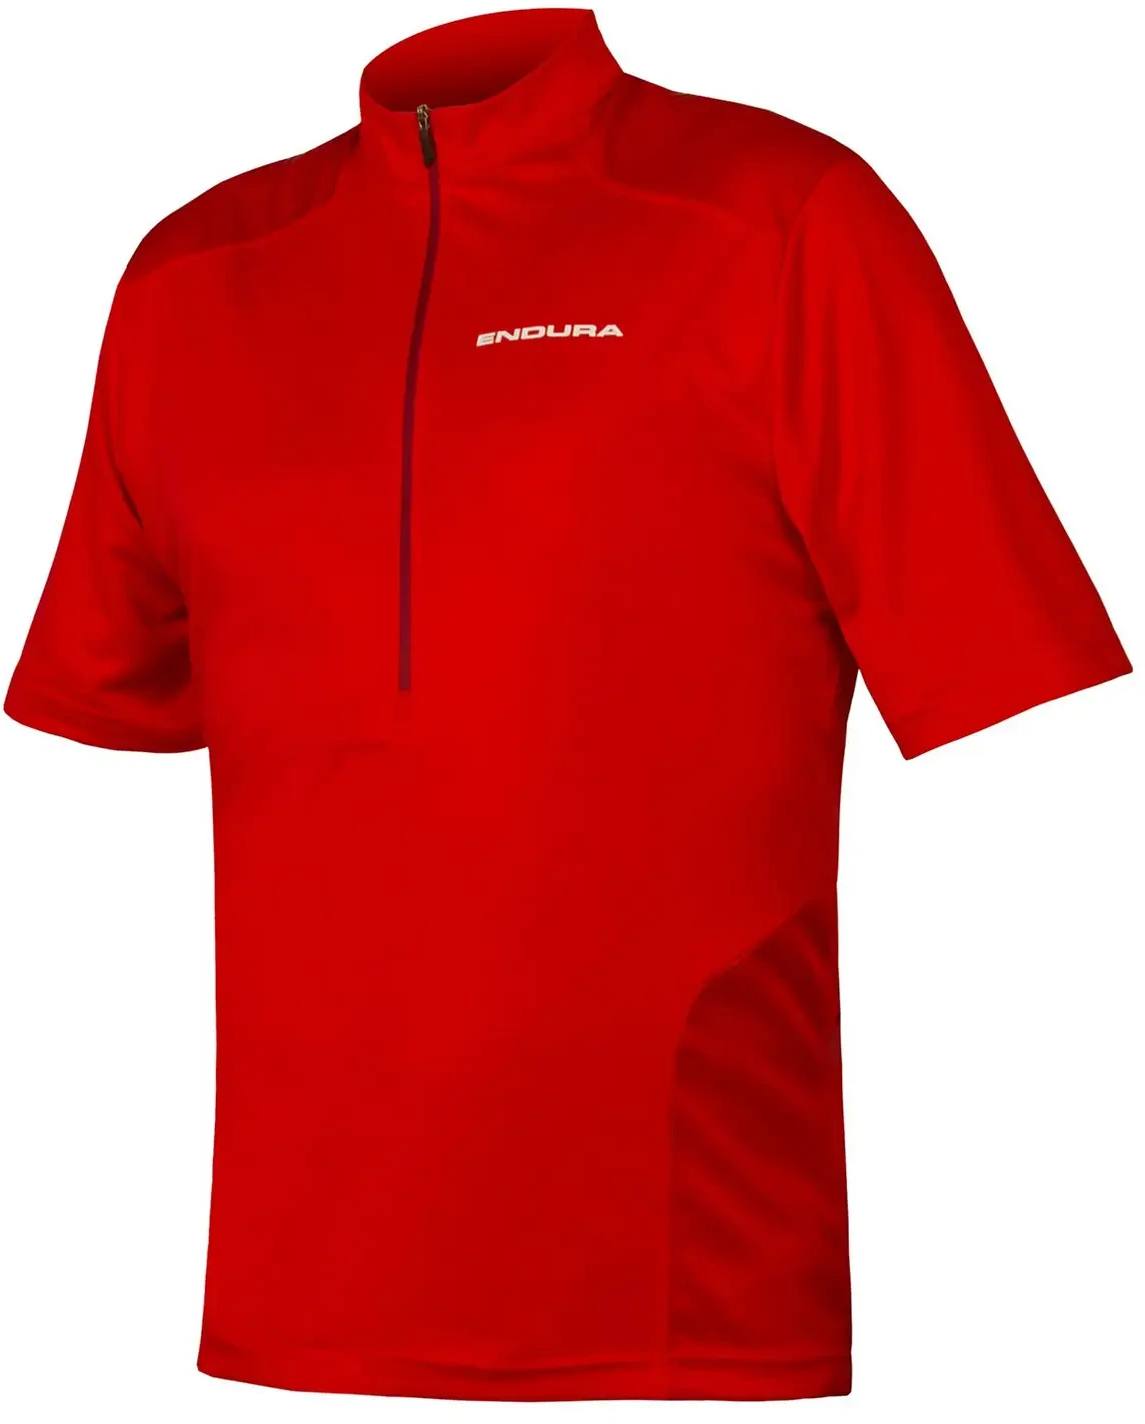 Hummvee SS Jersey Red M